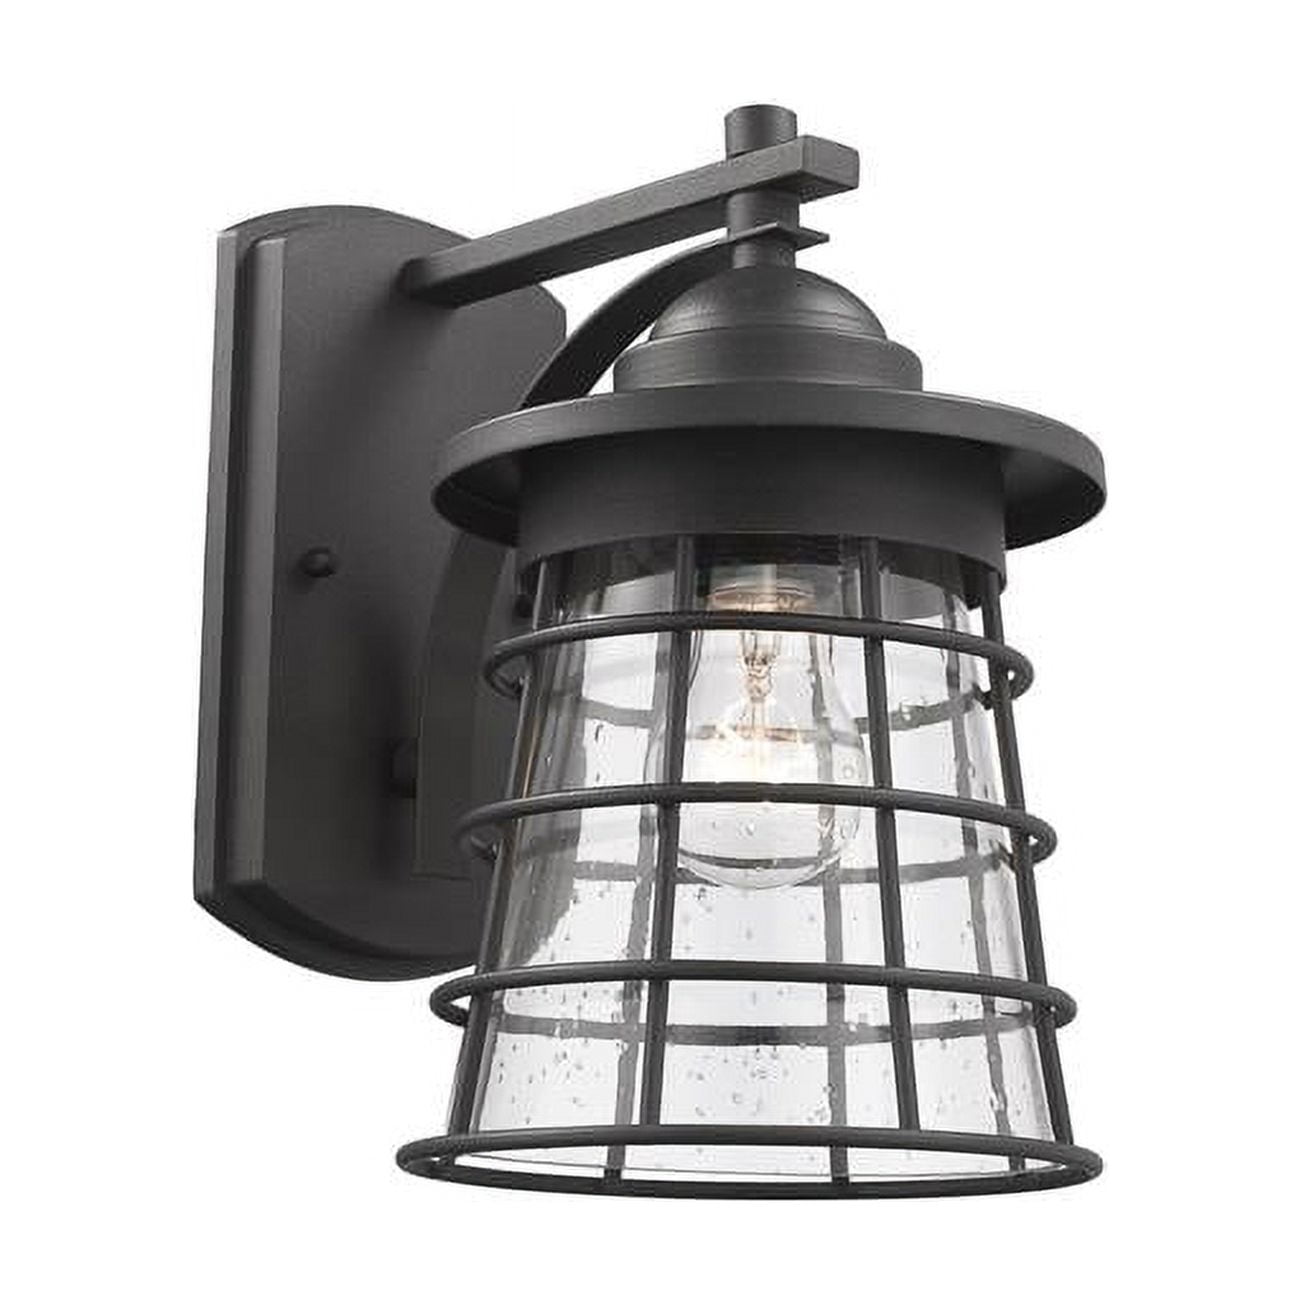 Picture of Chloe Lighting CH2S090BK11-OD1 Damon Transitional 1 Light Textured Black Outdoor Wall Sconce - 11 in.